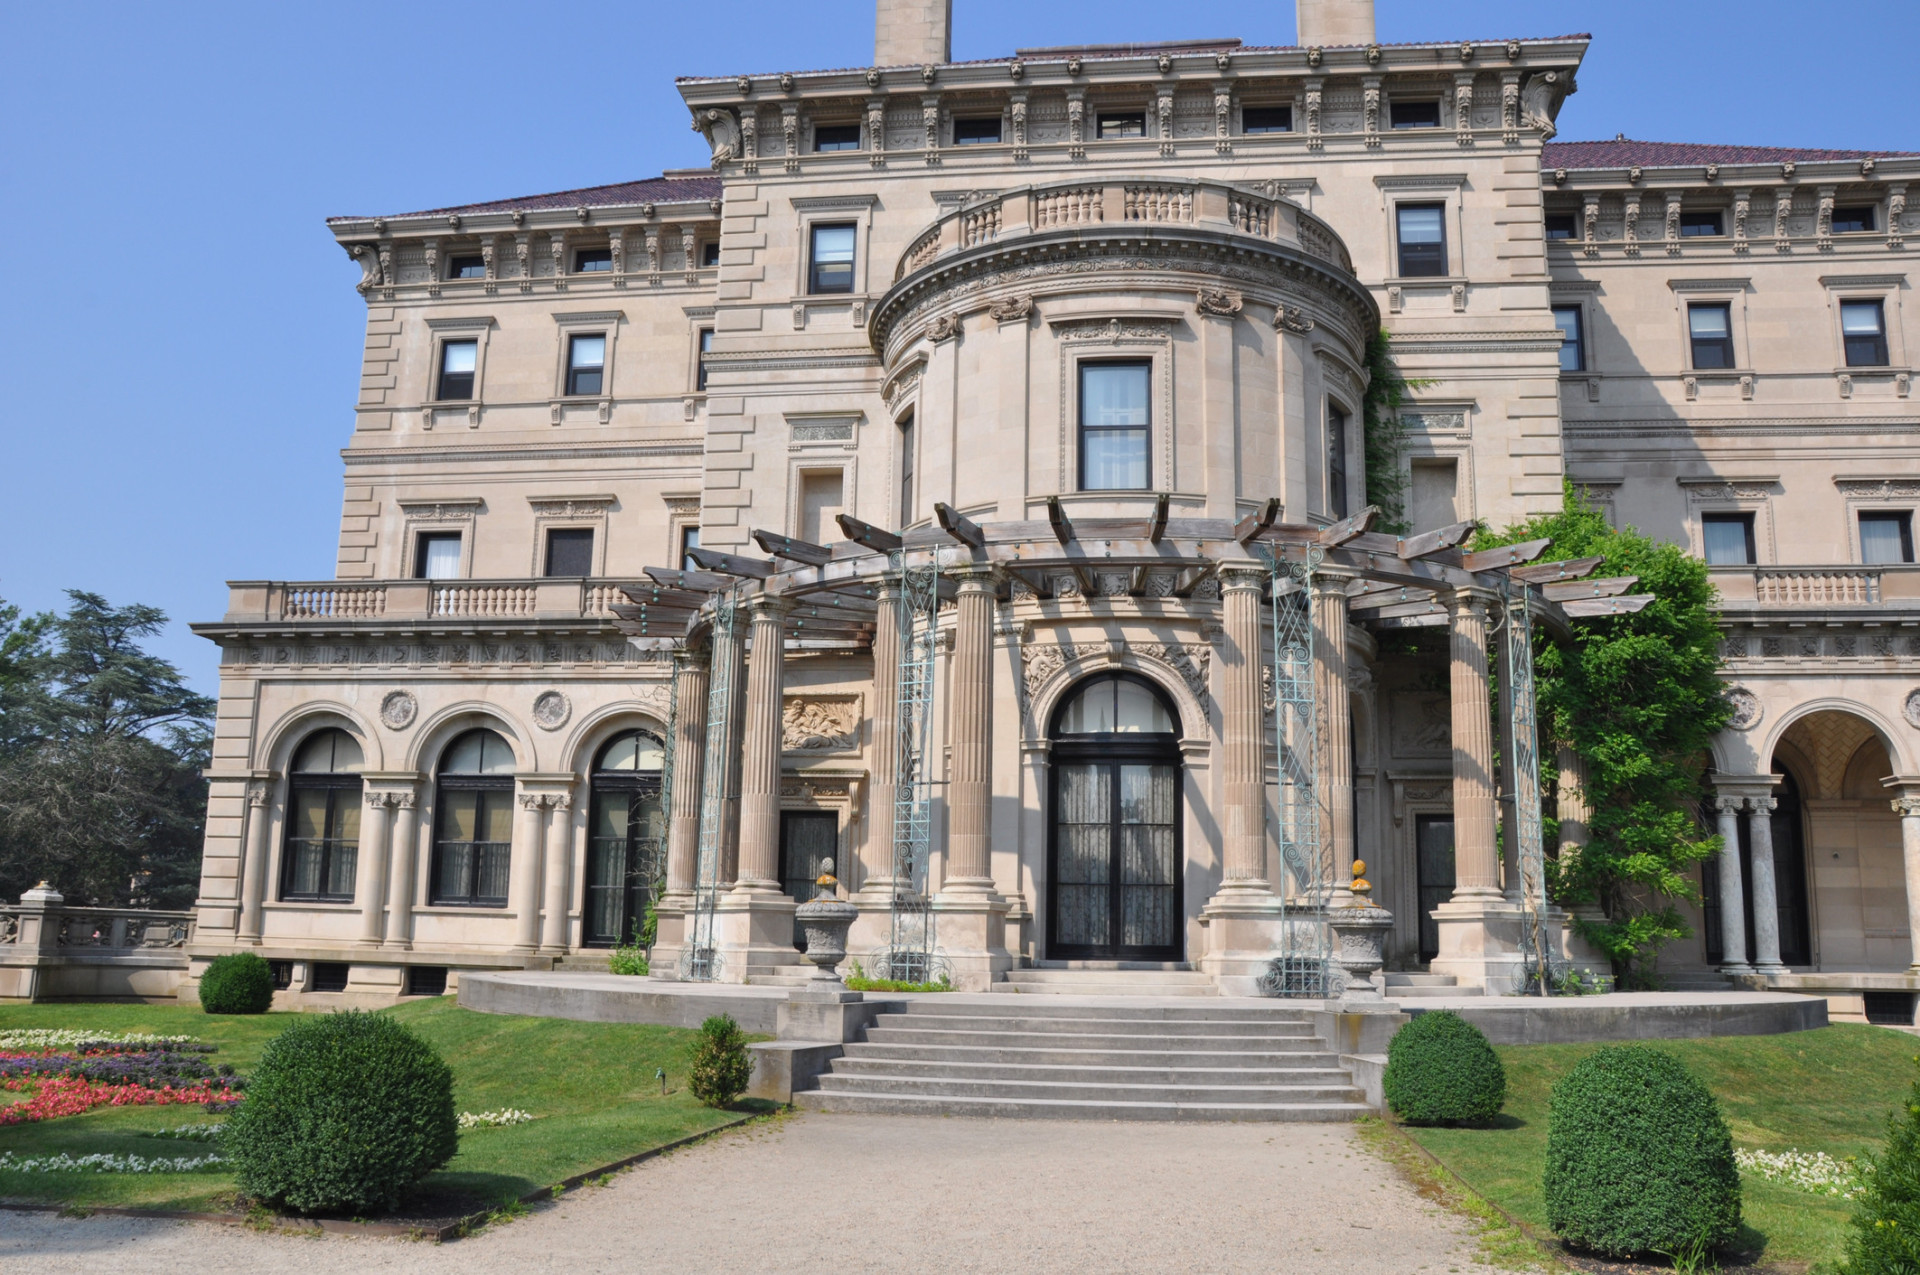 <p>These extraordinary estates from the 19th and 20th centuries blow thousands of visitors away yearly with their extravagant arches, breathtaking ballrooms, and glorious gardens. Some of the most popular houses include The Breakers, Rosecliff, and The Elms.</p> <p>See also: <a href="https://www.msn.com/en-us/news/other/stunning-nature-photographs-that-look-like-paintings/ss-BB1fpVzO">Stunning nature photographs that look like paintings</a></p><p>You may also like:<a href="https://www.starsinsider.com/n/496298?utm_source=msn.com&utm_medium=display&utm_campaign=referral_description&utm_content=247050v5en-us"> Married celebs who don't wear a ring</a></p>